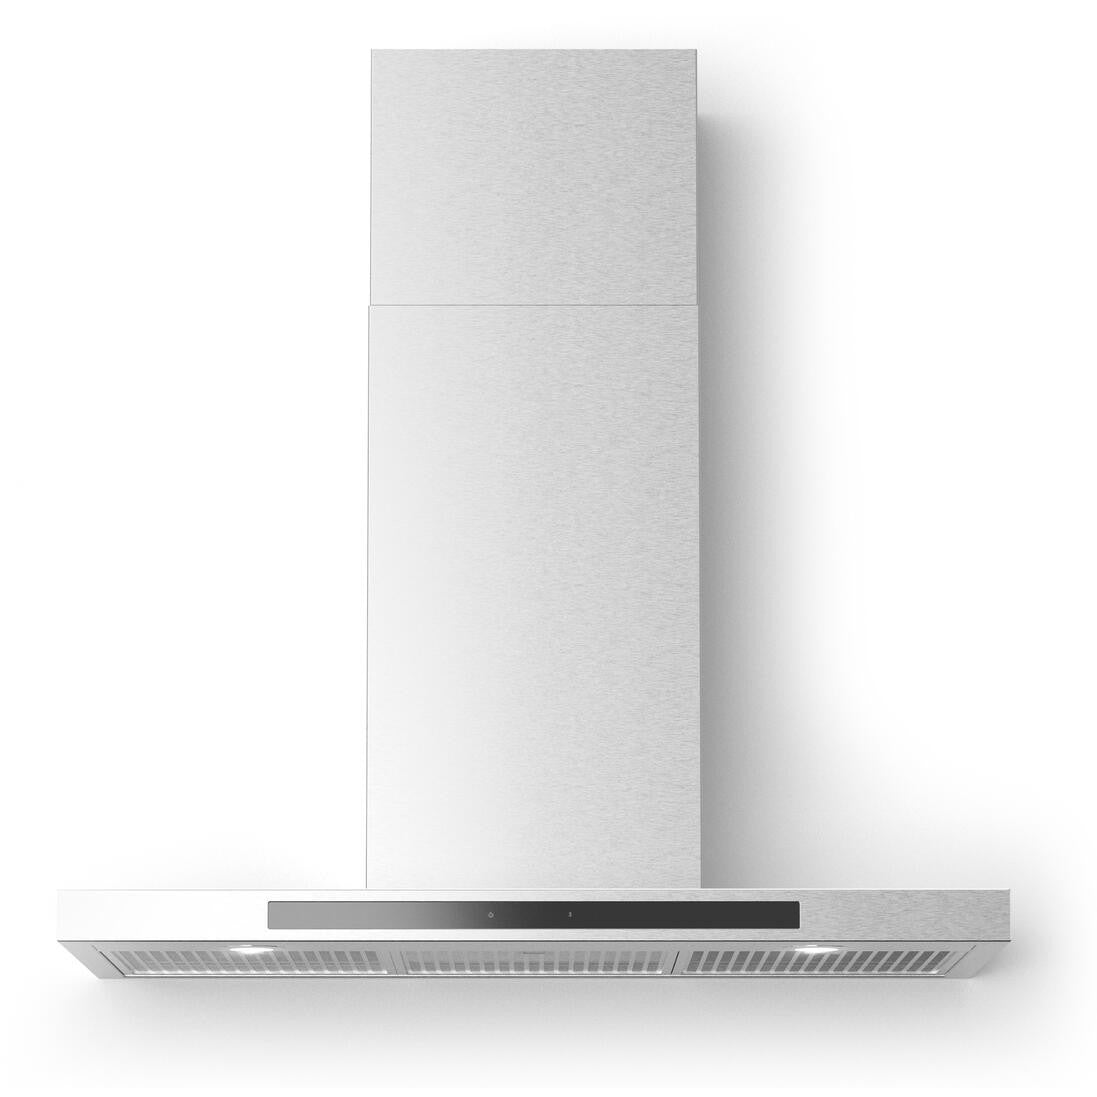 Forte Alberto 36" 600 CFM Convertible Residential Round Duct Stainless Steel Wall Mount Range Hood With Chimney Extension, Recirculating Kit, Charcoal Filters, and LED Lighting